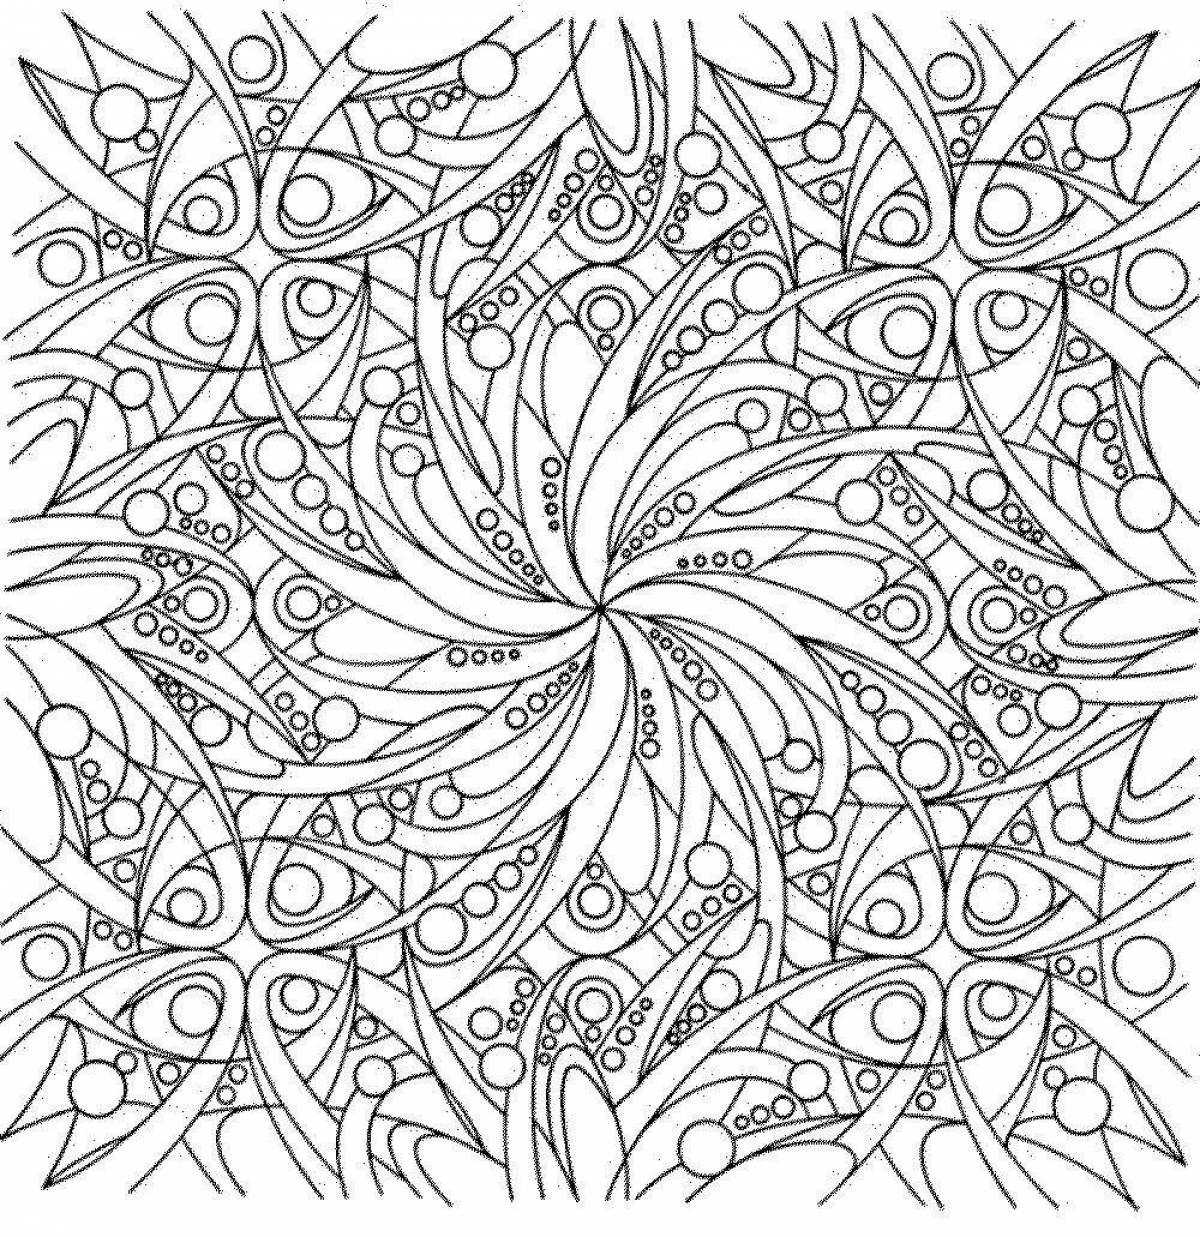 Serene patterns and ornaments for coloring pages for children